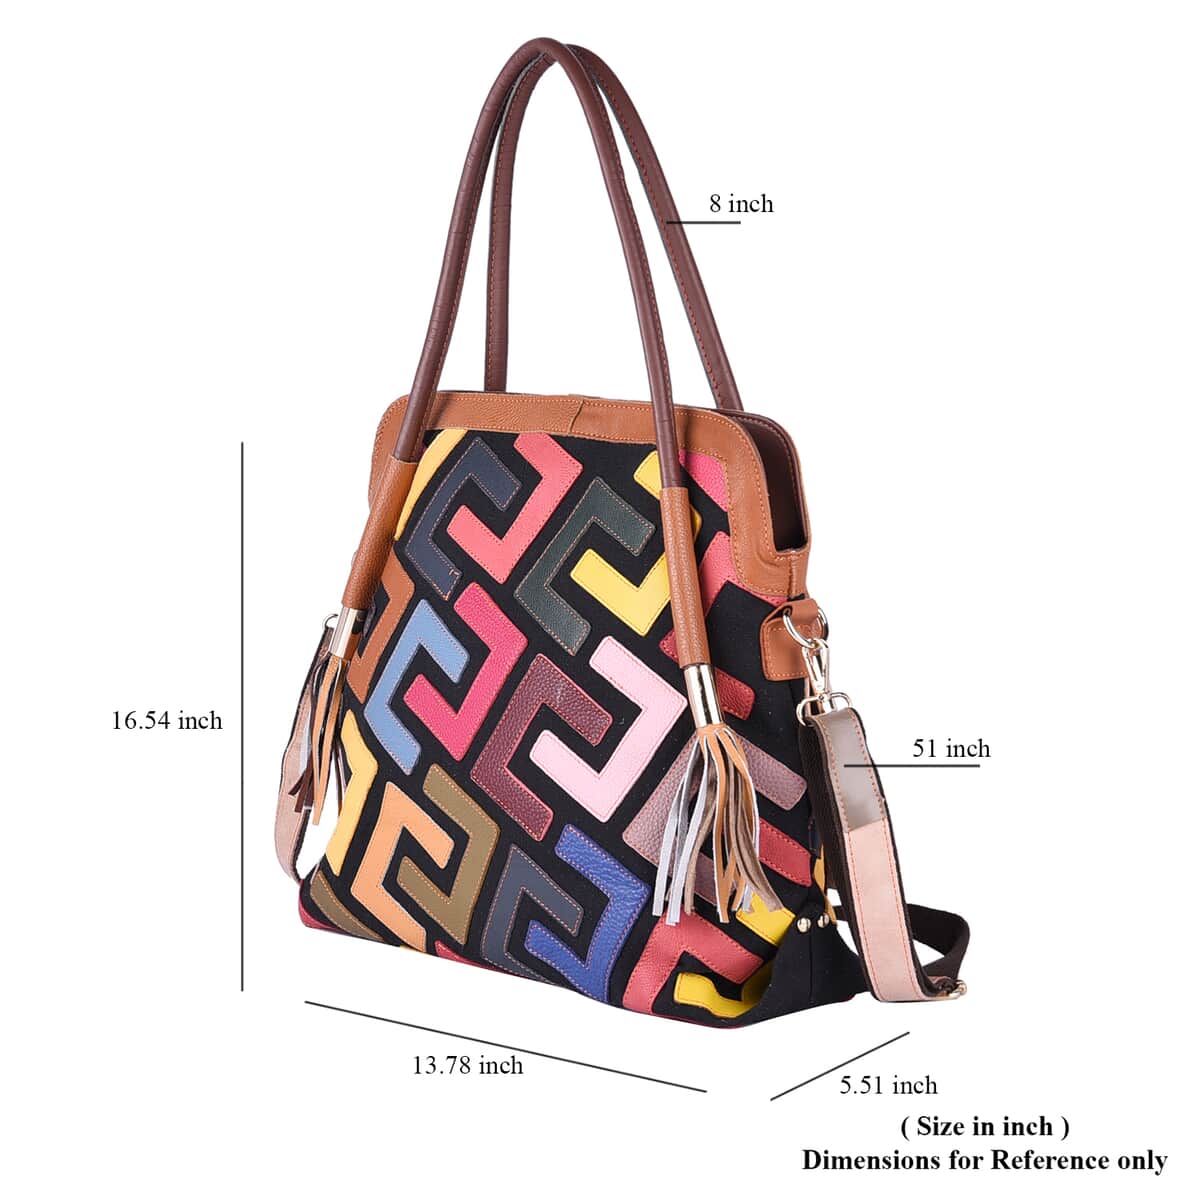 CHAOS BY ELSIE Multi Color Fret Pattern Genuine Leather Convertible Tote Bag with Handle and Shoulder Strap (16.54"x5.51"x13.78") image number 6